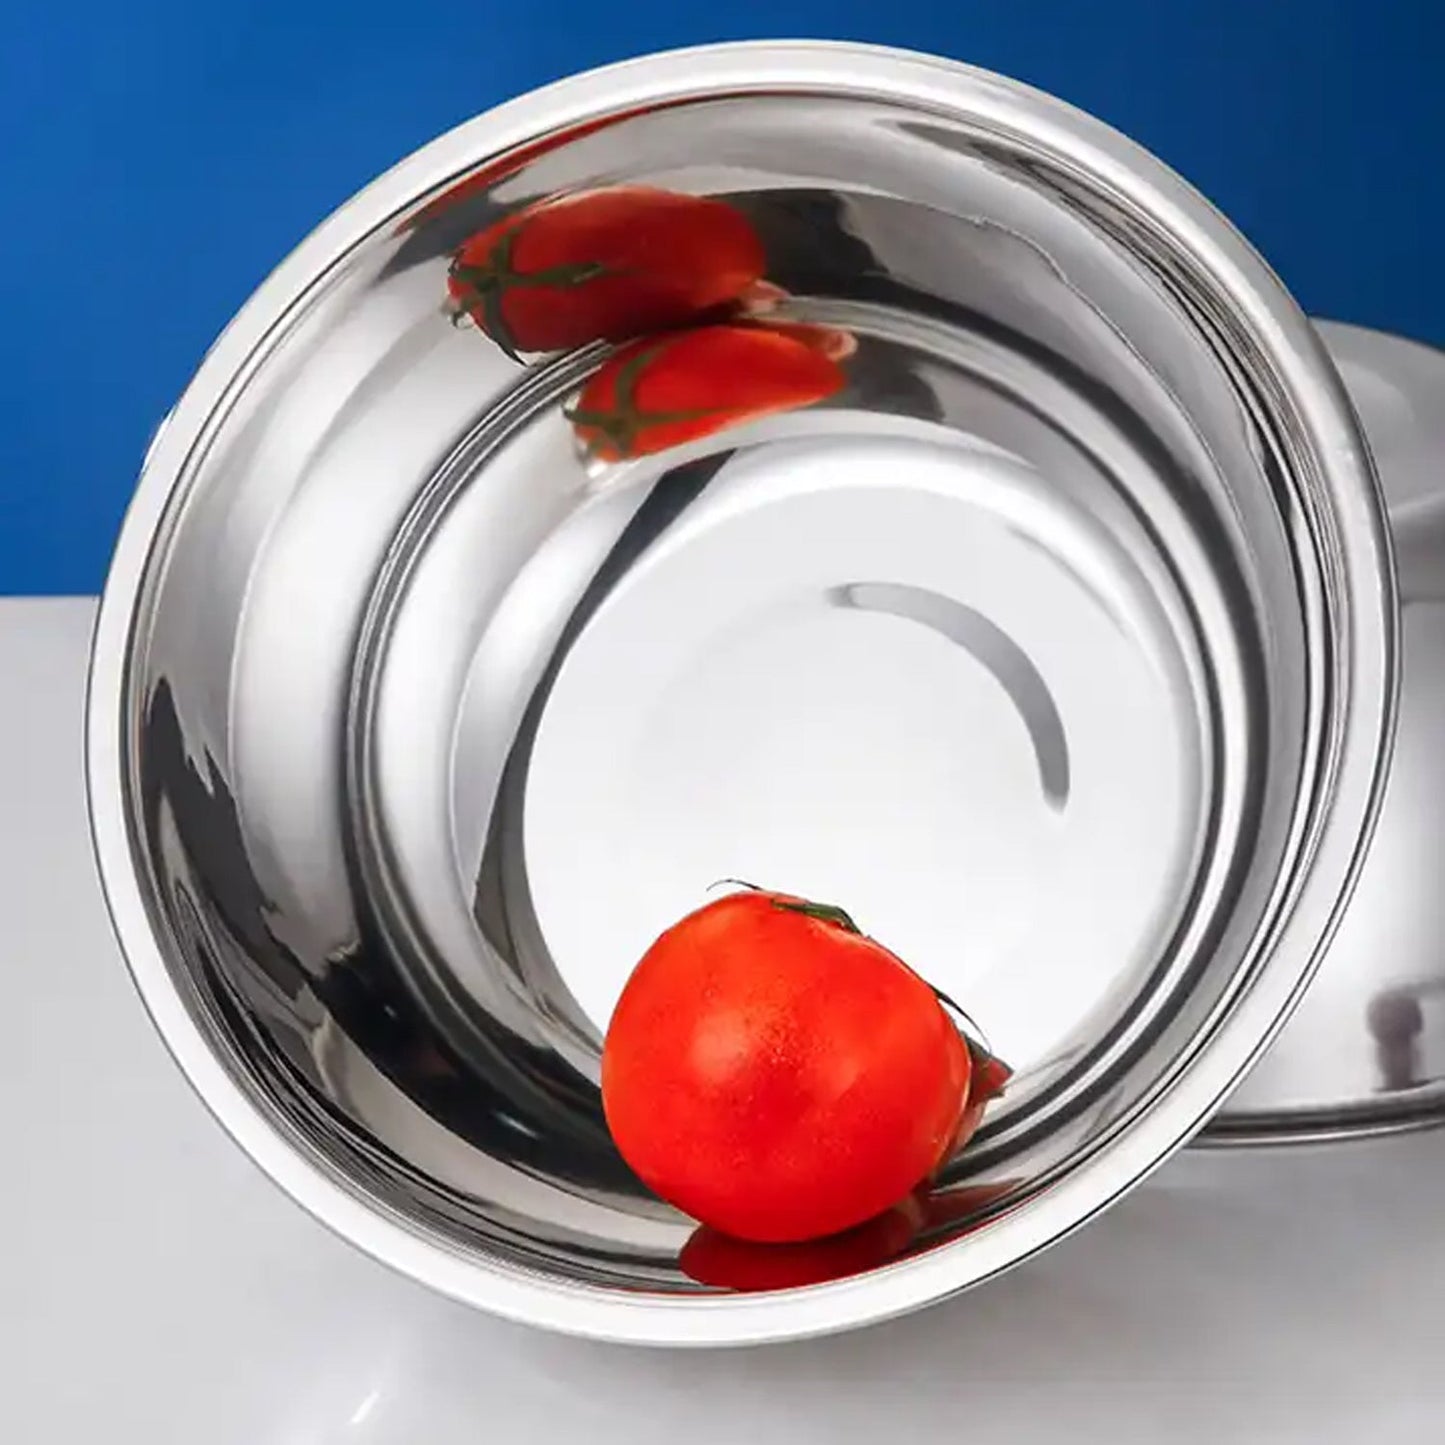 5507 Stainless Steel Bowl | Serving Dessert Curry Soup Bowls Wati Vati Katori | Small Rice Side Dishes | Kitchen & Dining ,Solid, ideal for serving Chatni, achar and Catch up (1 Pc)